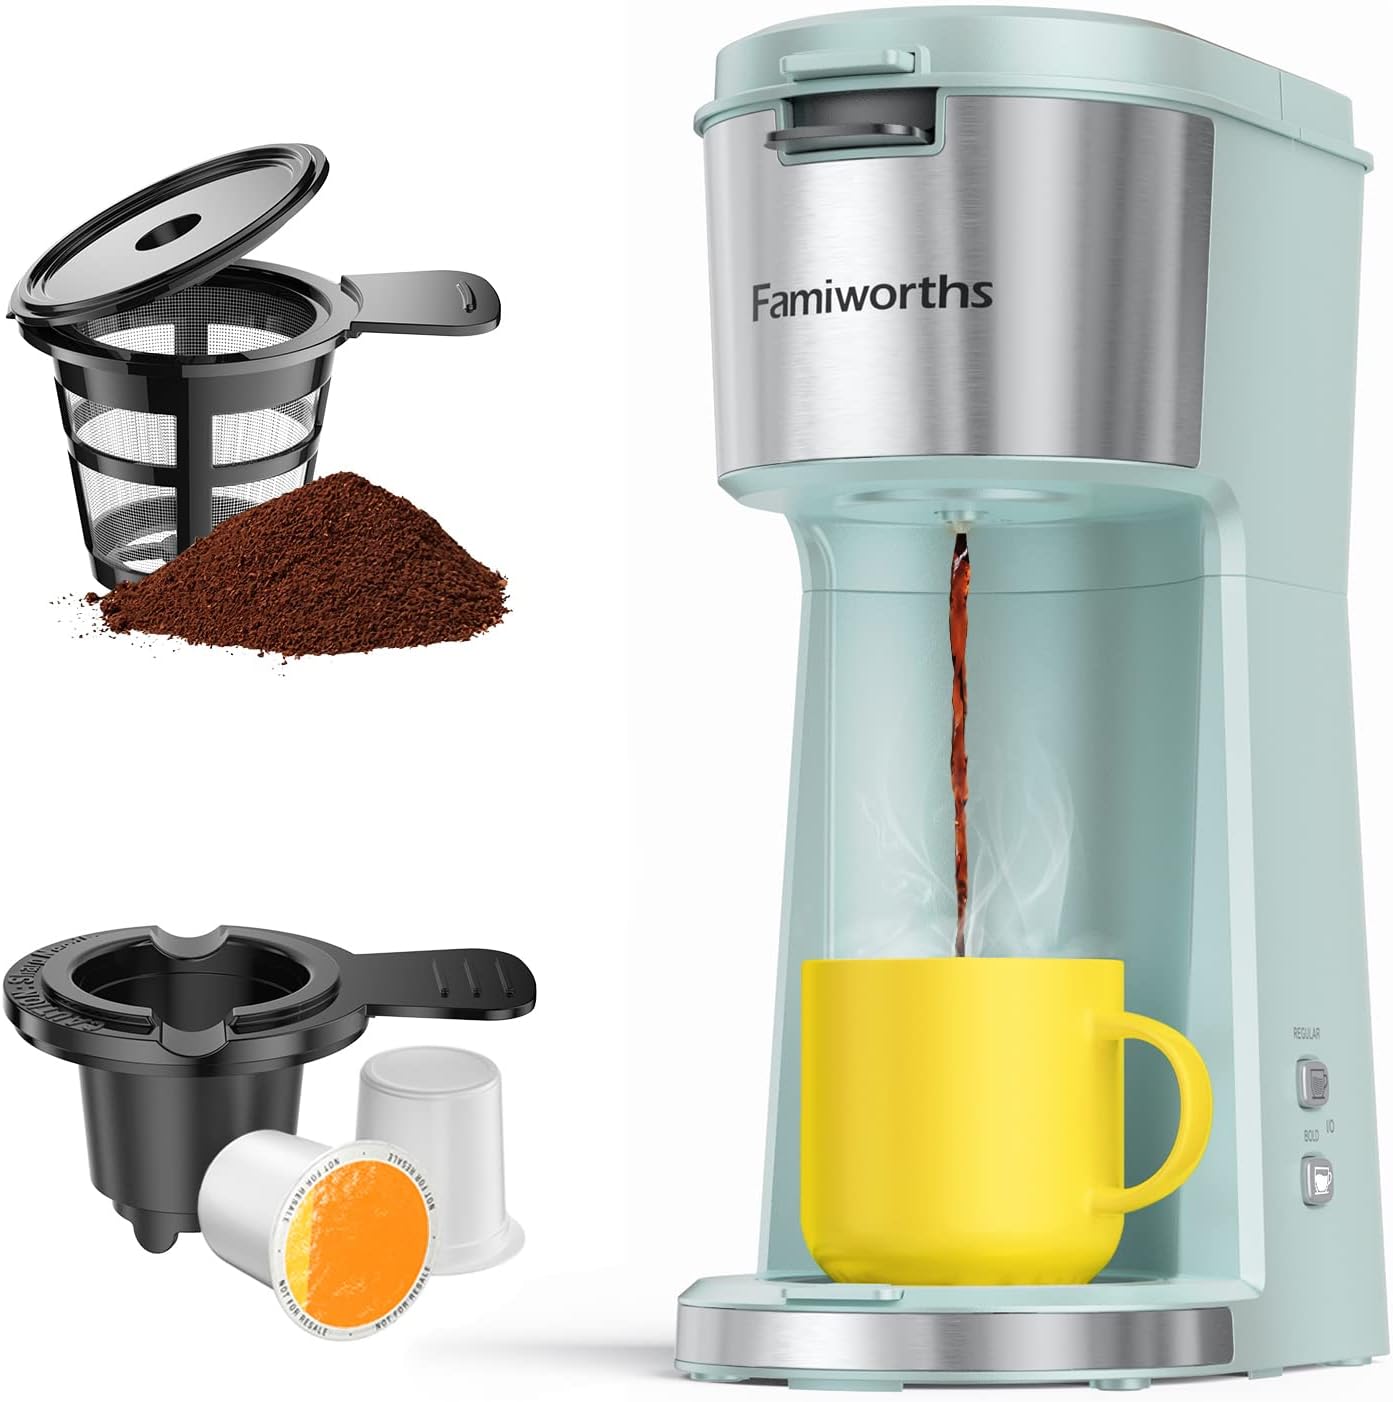 Famiworths Single Serve Coffee Maker for K Cup & Ground Coffee, With Bold Brew, One Cup Coffee Maker, 6 to 14 oz. Brew Sizes, Fits Travel Mug, Fresh Green